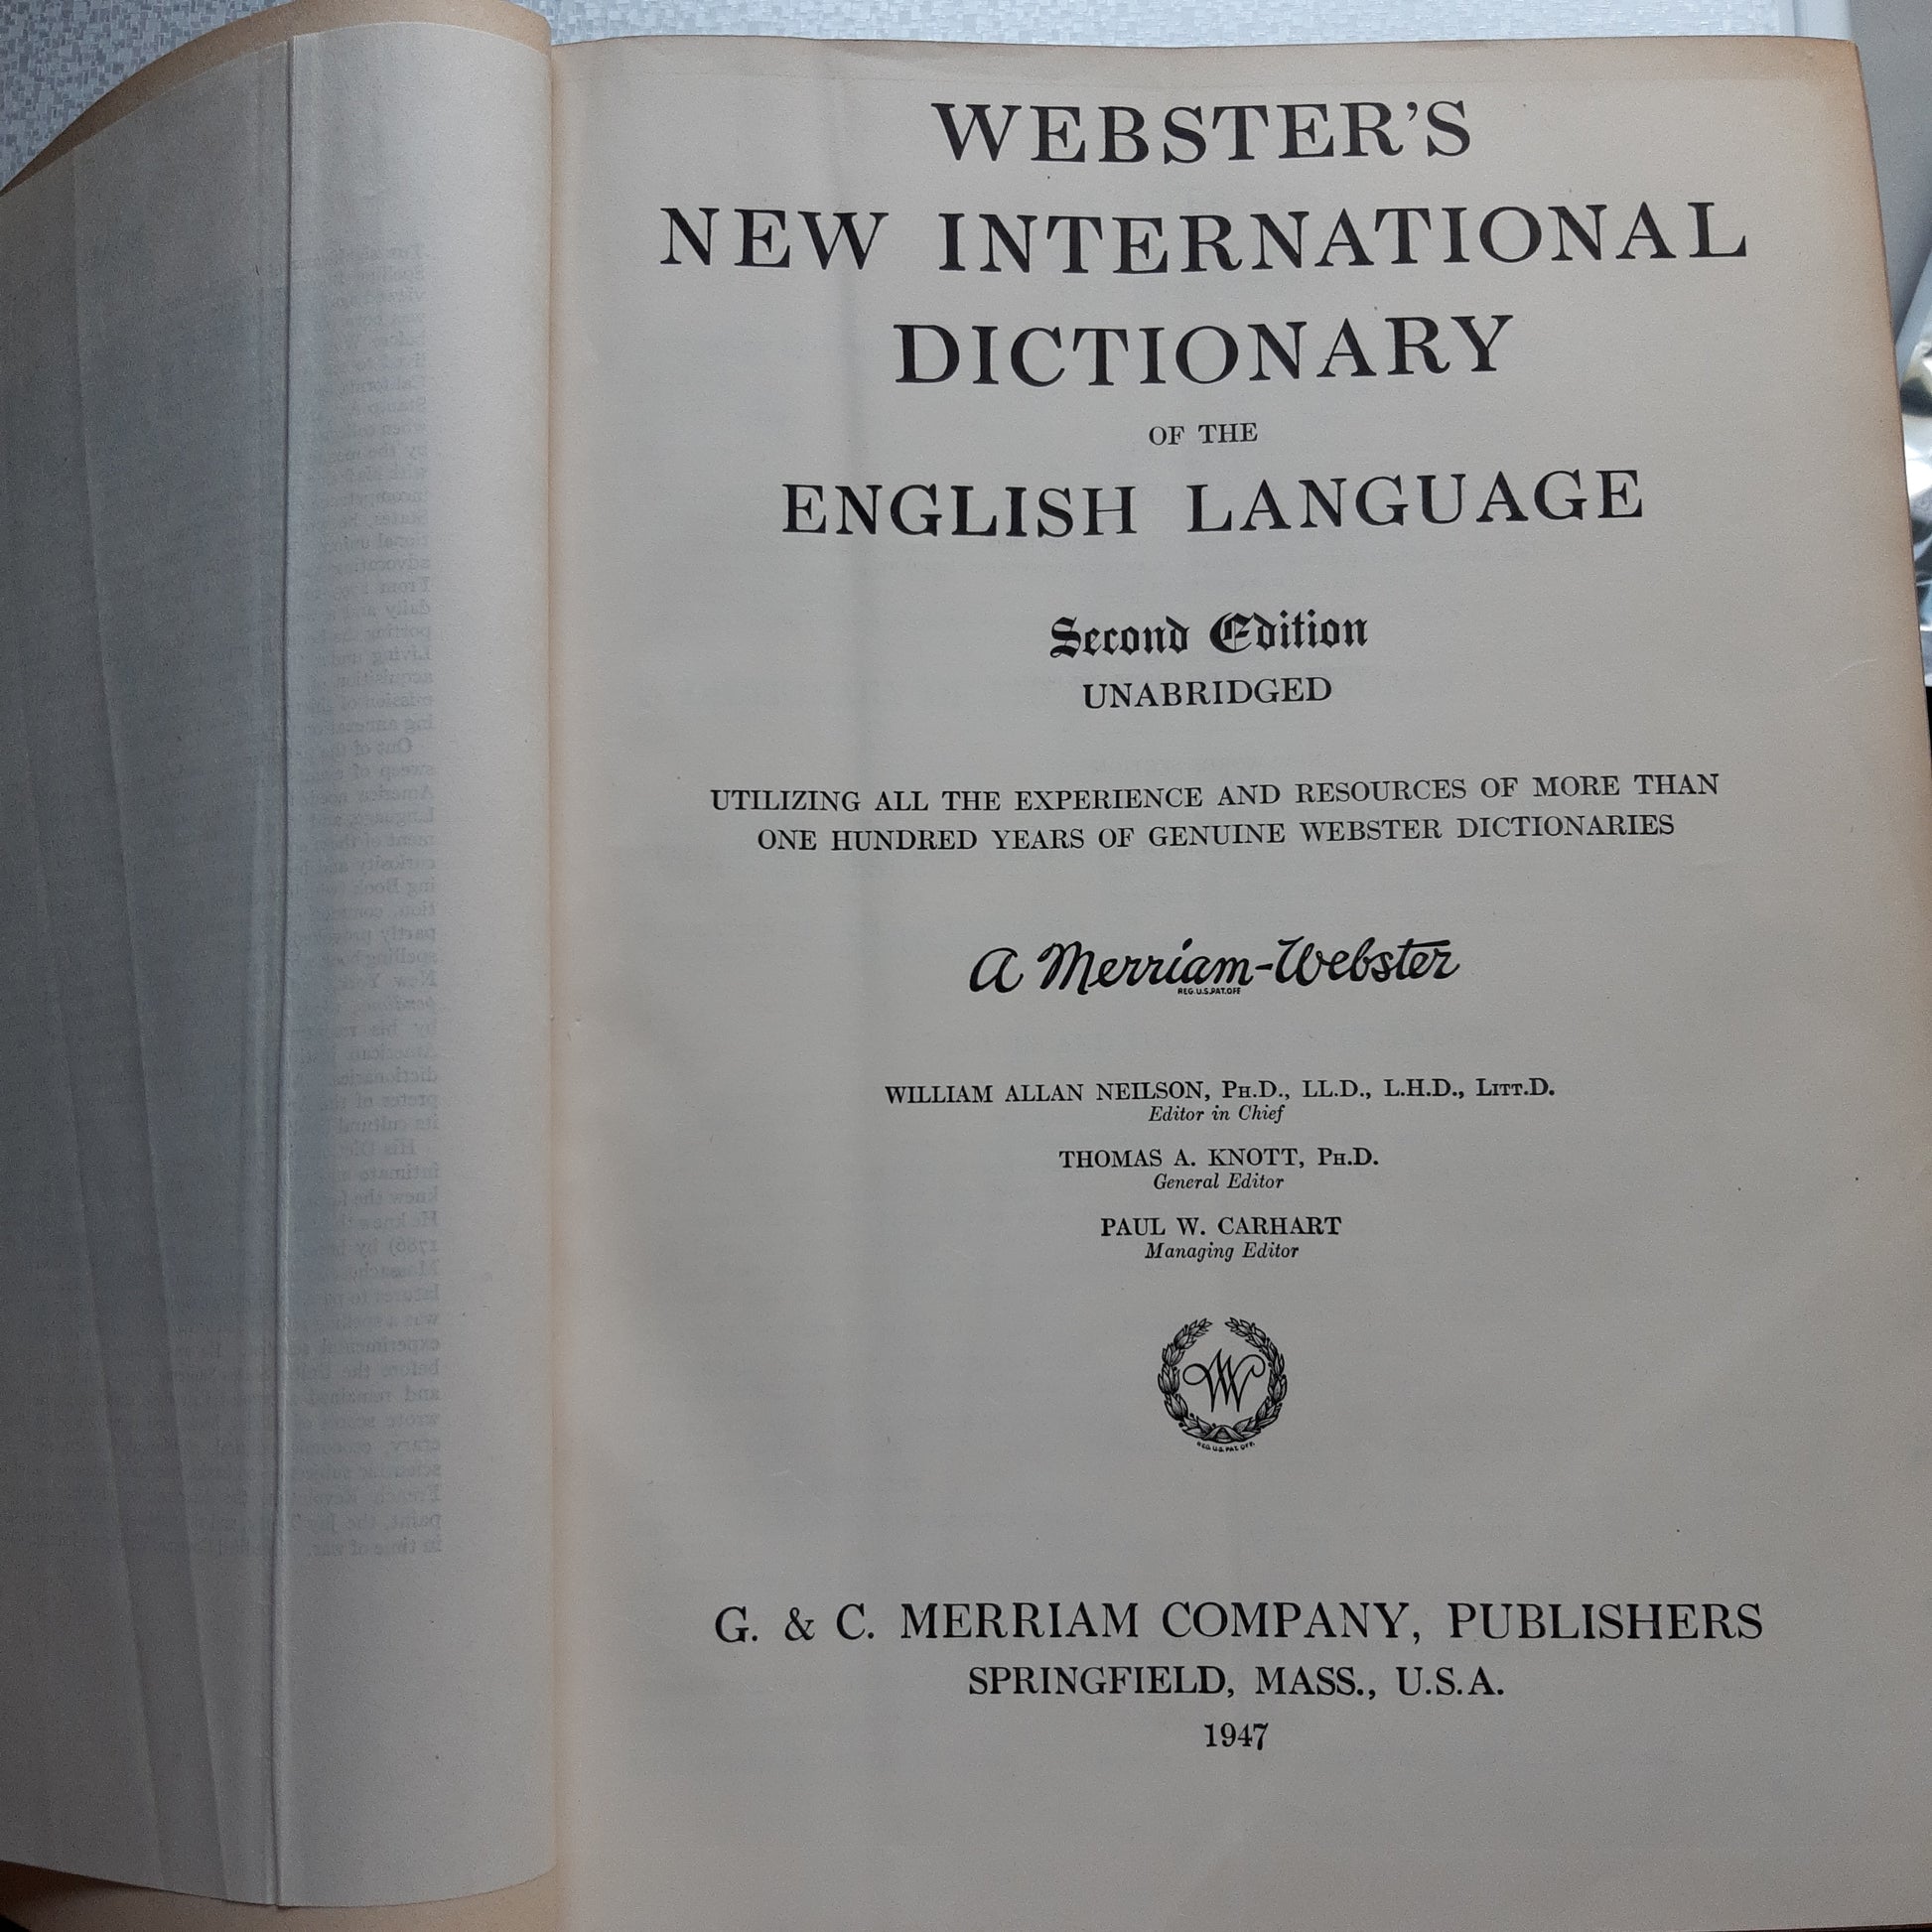 webster's new international dictionary - second edition - latest unabridged 1947